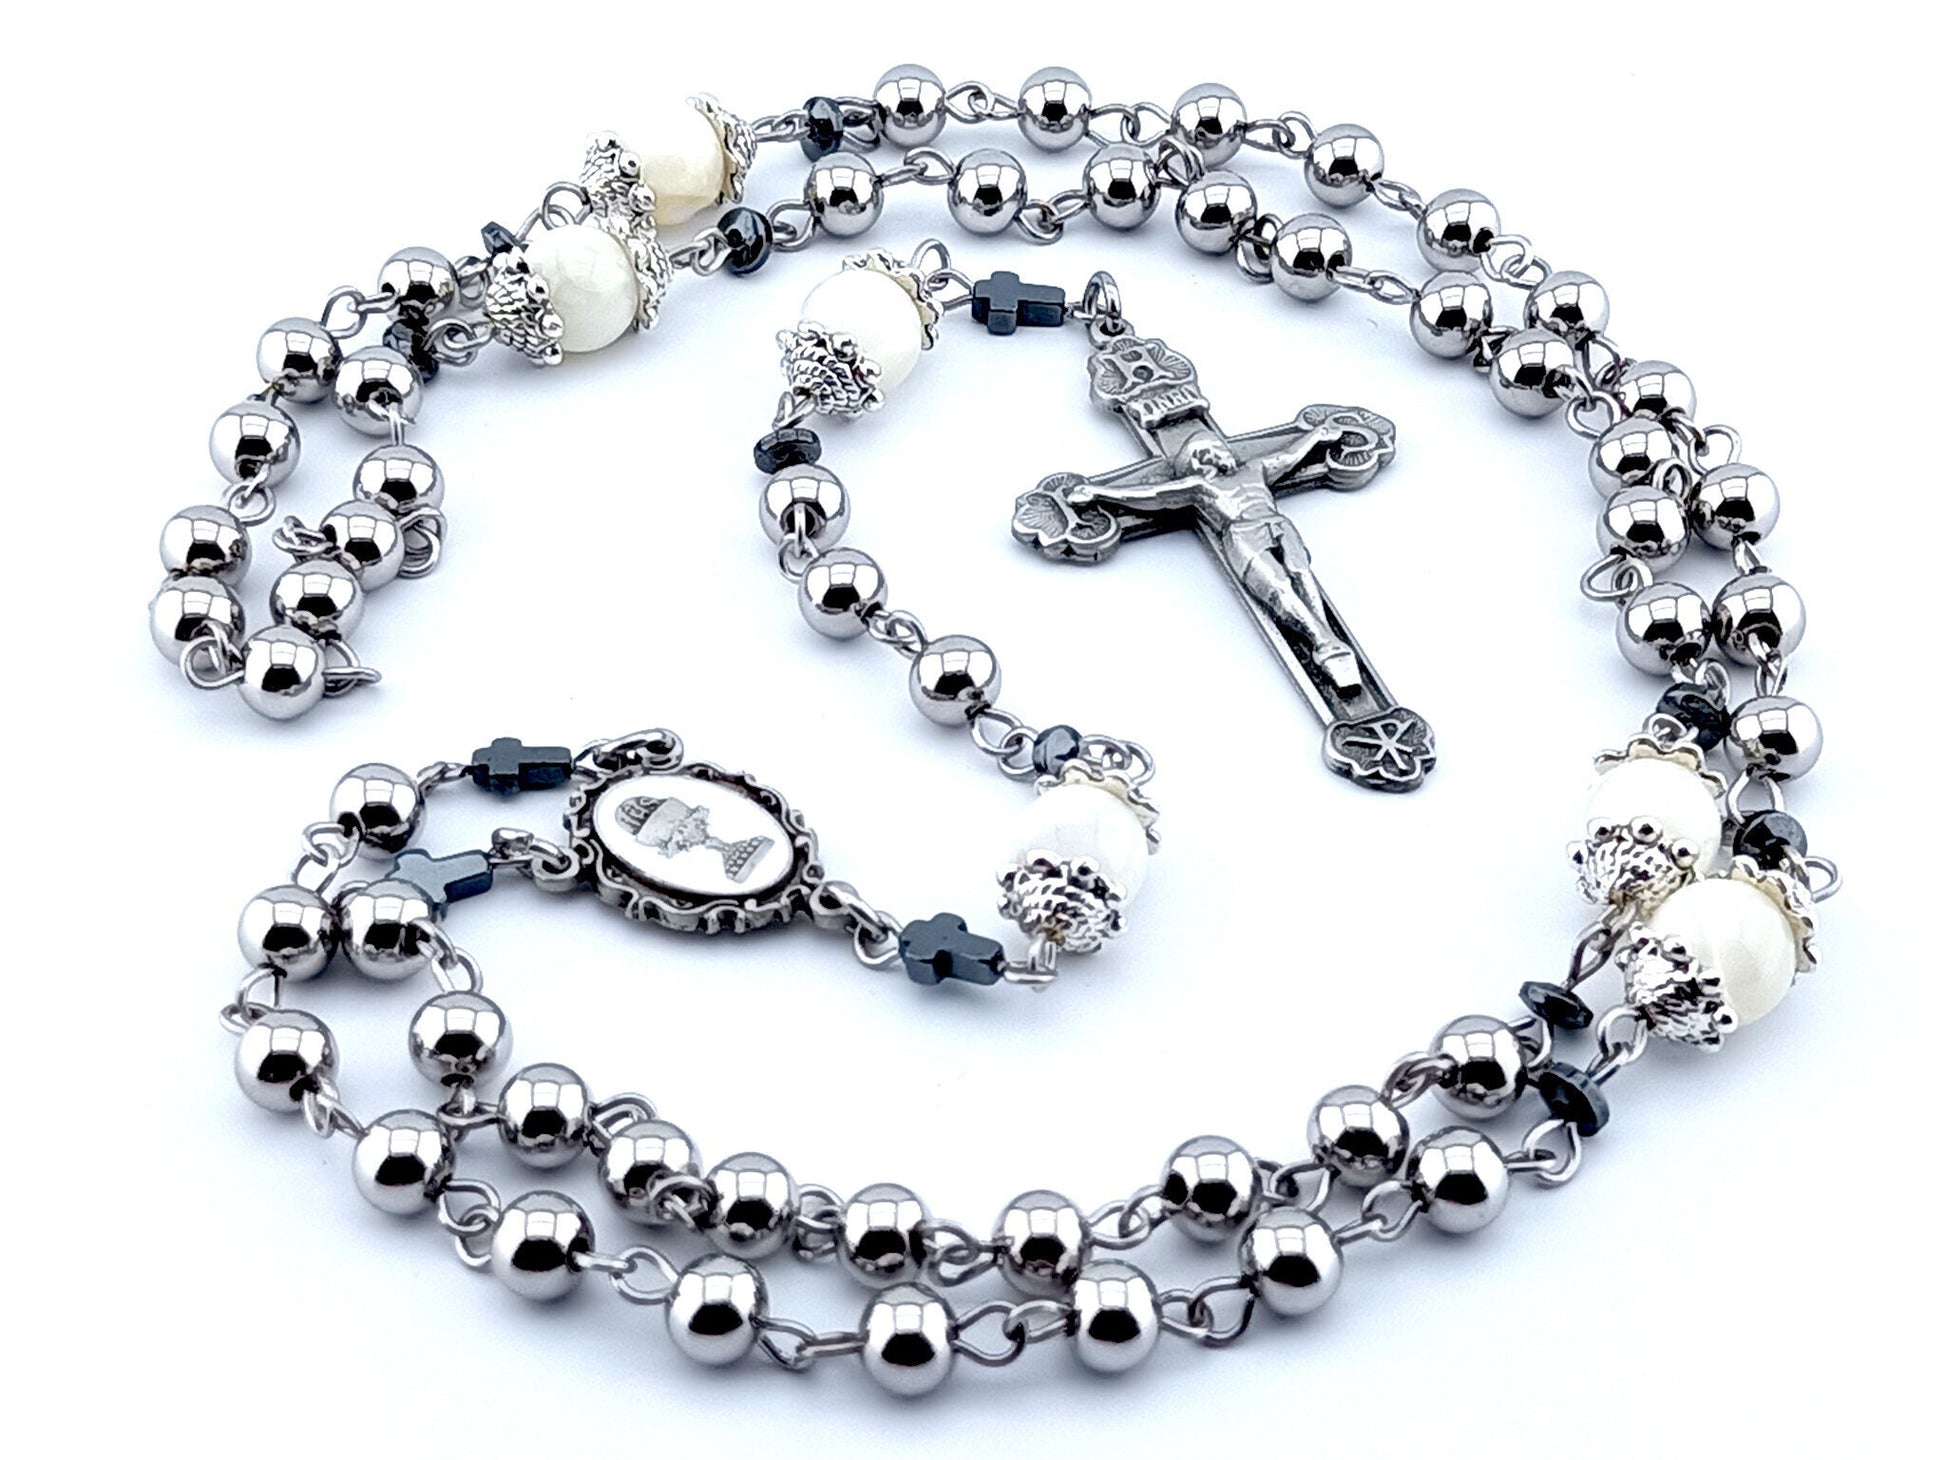 First Holy Communion unique rosary beads with stainless steel beads and wire, pewter crucifix and centre medal, mother of pearl pater beads and silver bead caps.